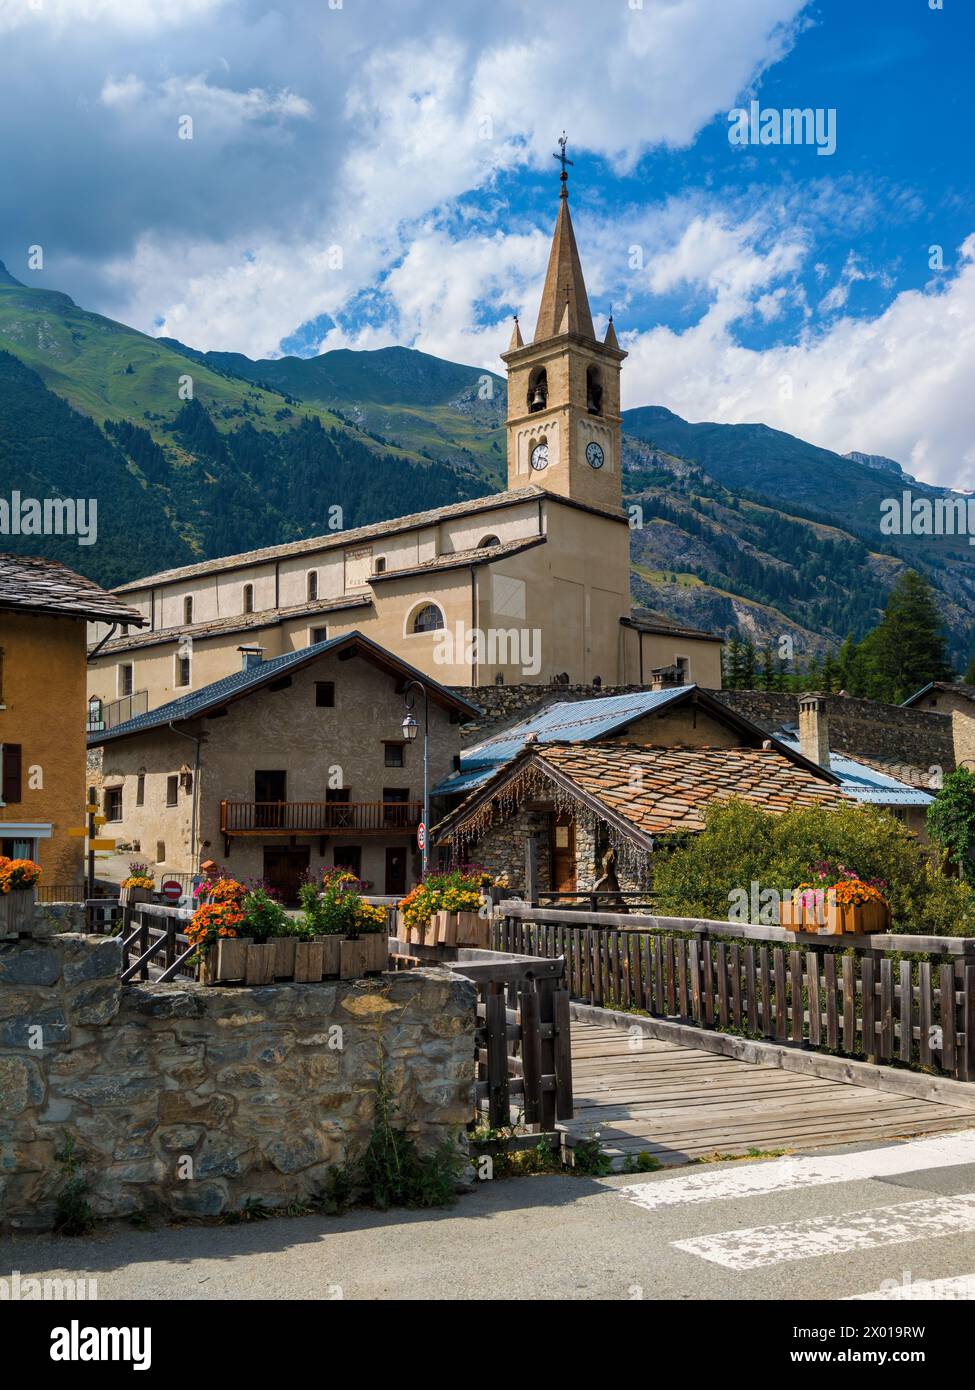 View of the old church and small alpine town of Val-Cenis in France. Stock Photo